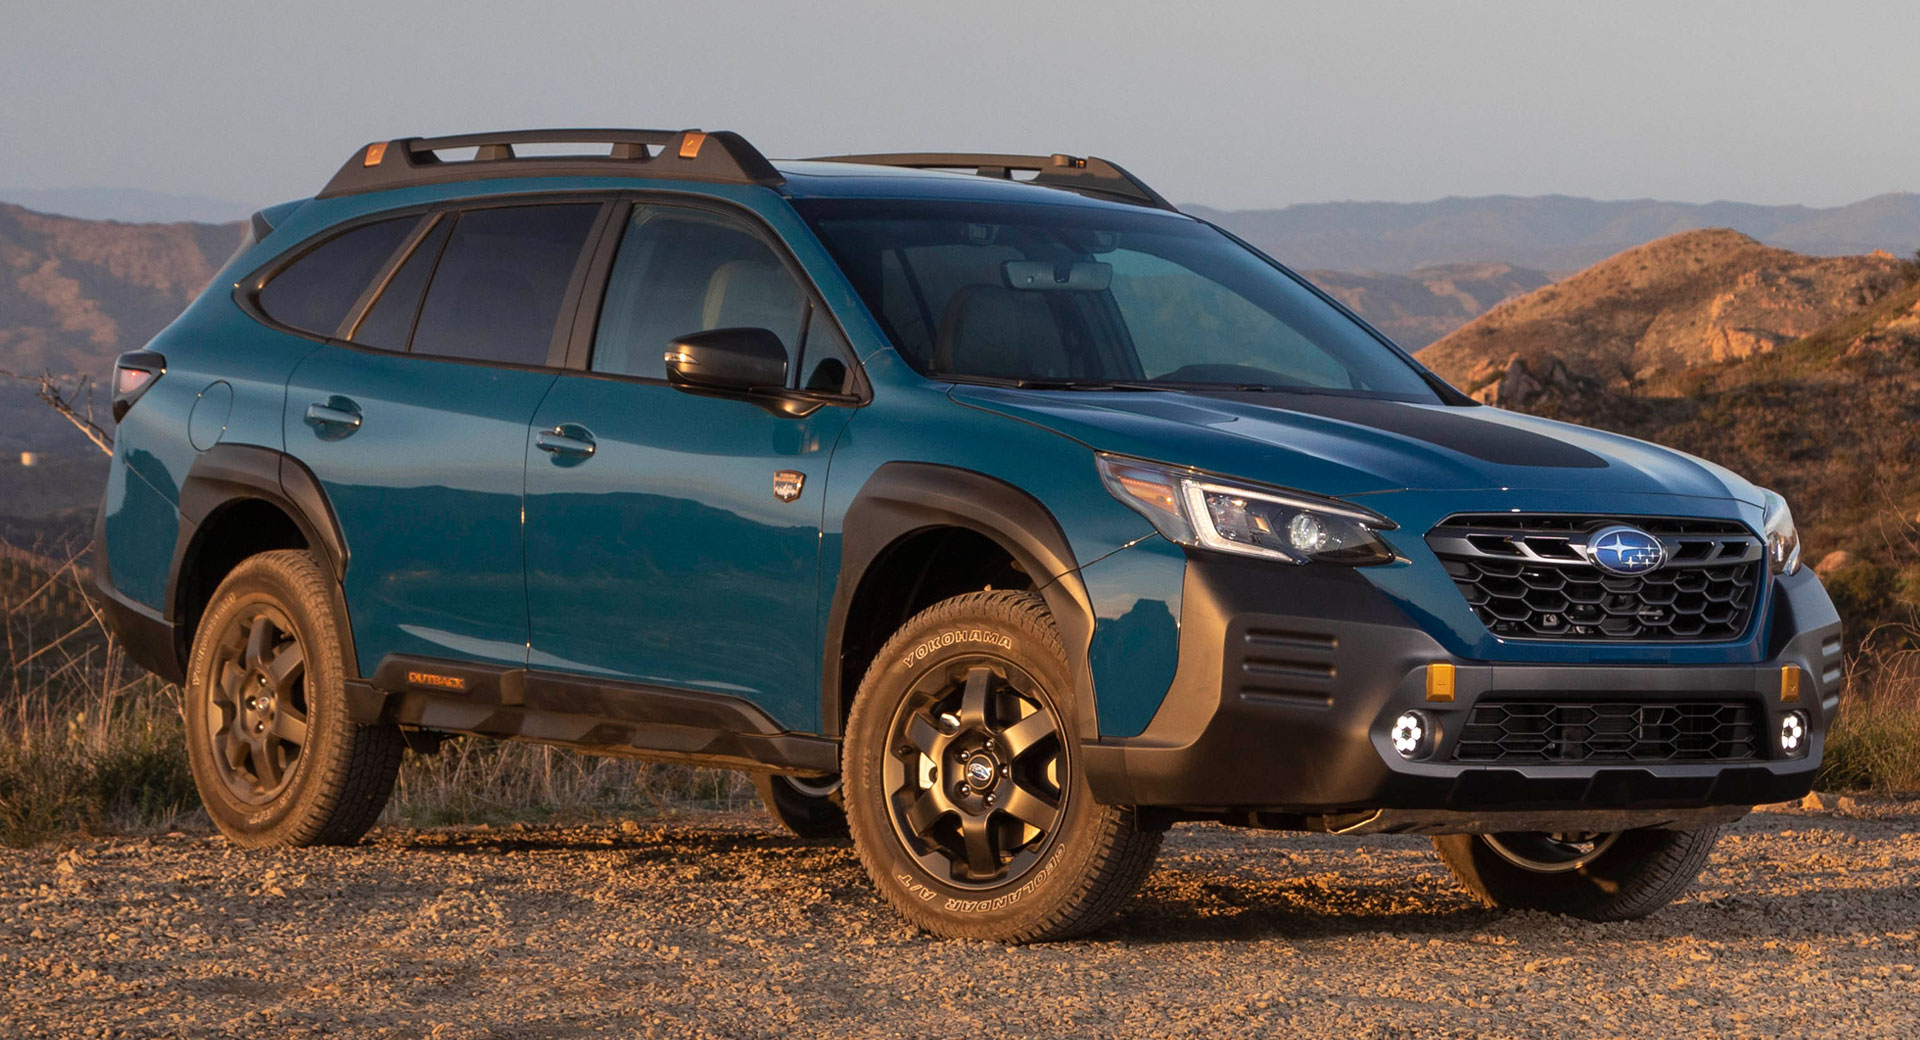 The Rugged 2022 Subaru Outback Wilderness Will Cost $36,995 | Carscoops